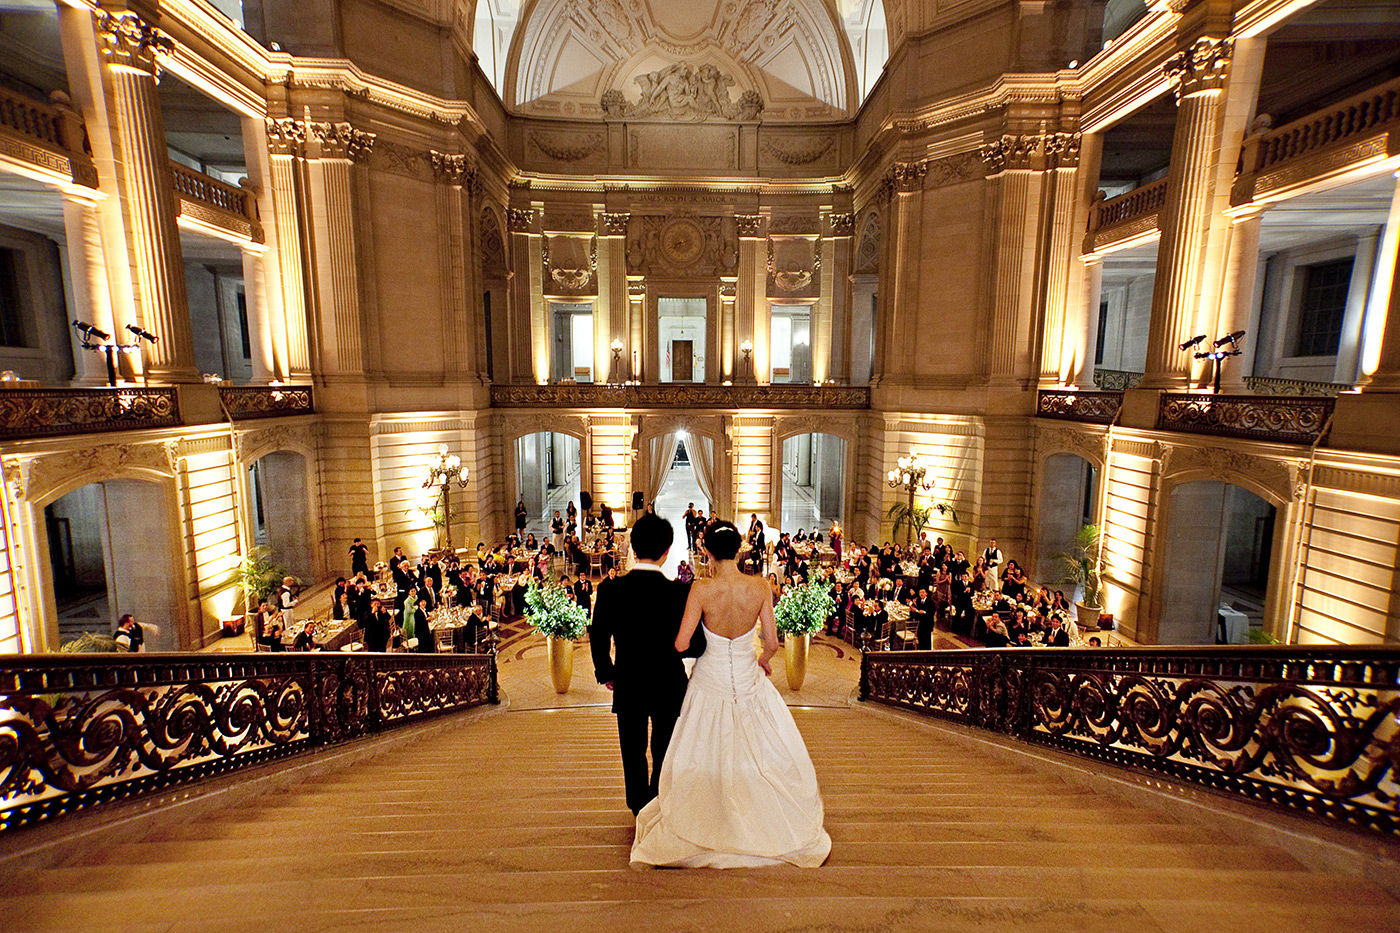 View our list of preferred Bay Area wedding vendors.